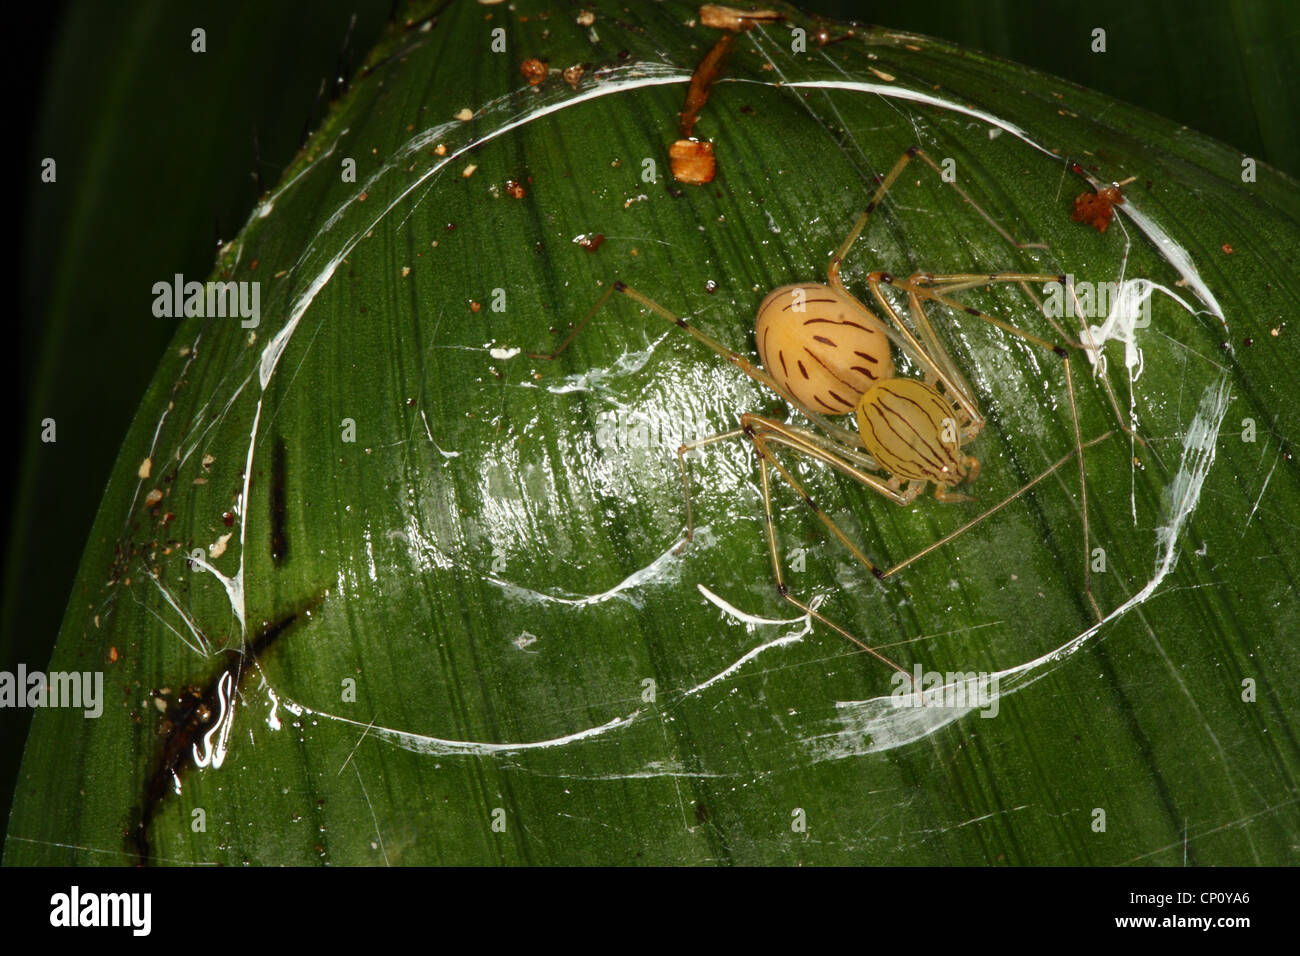 A spitting spider, a member of the family Scytodidae. Stock Photo